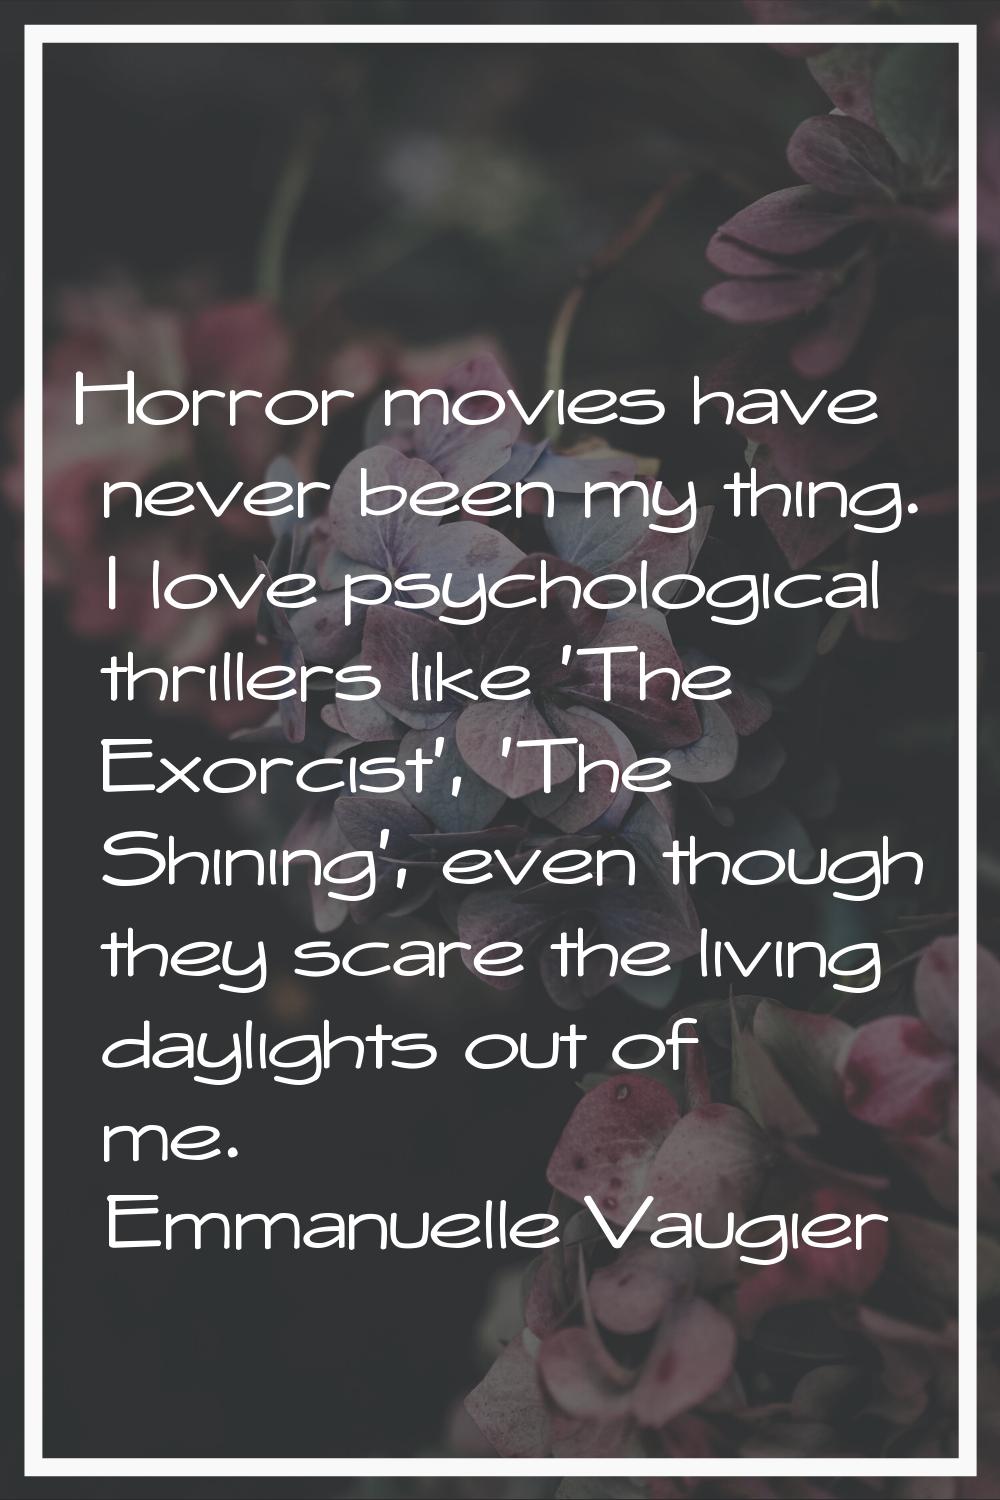 Horror movies have never been my thing. I love psychological thrillers like 'The Exorcist', 'The Sh